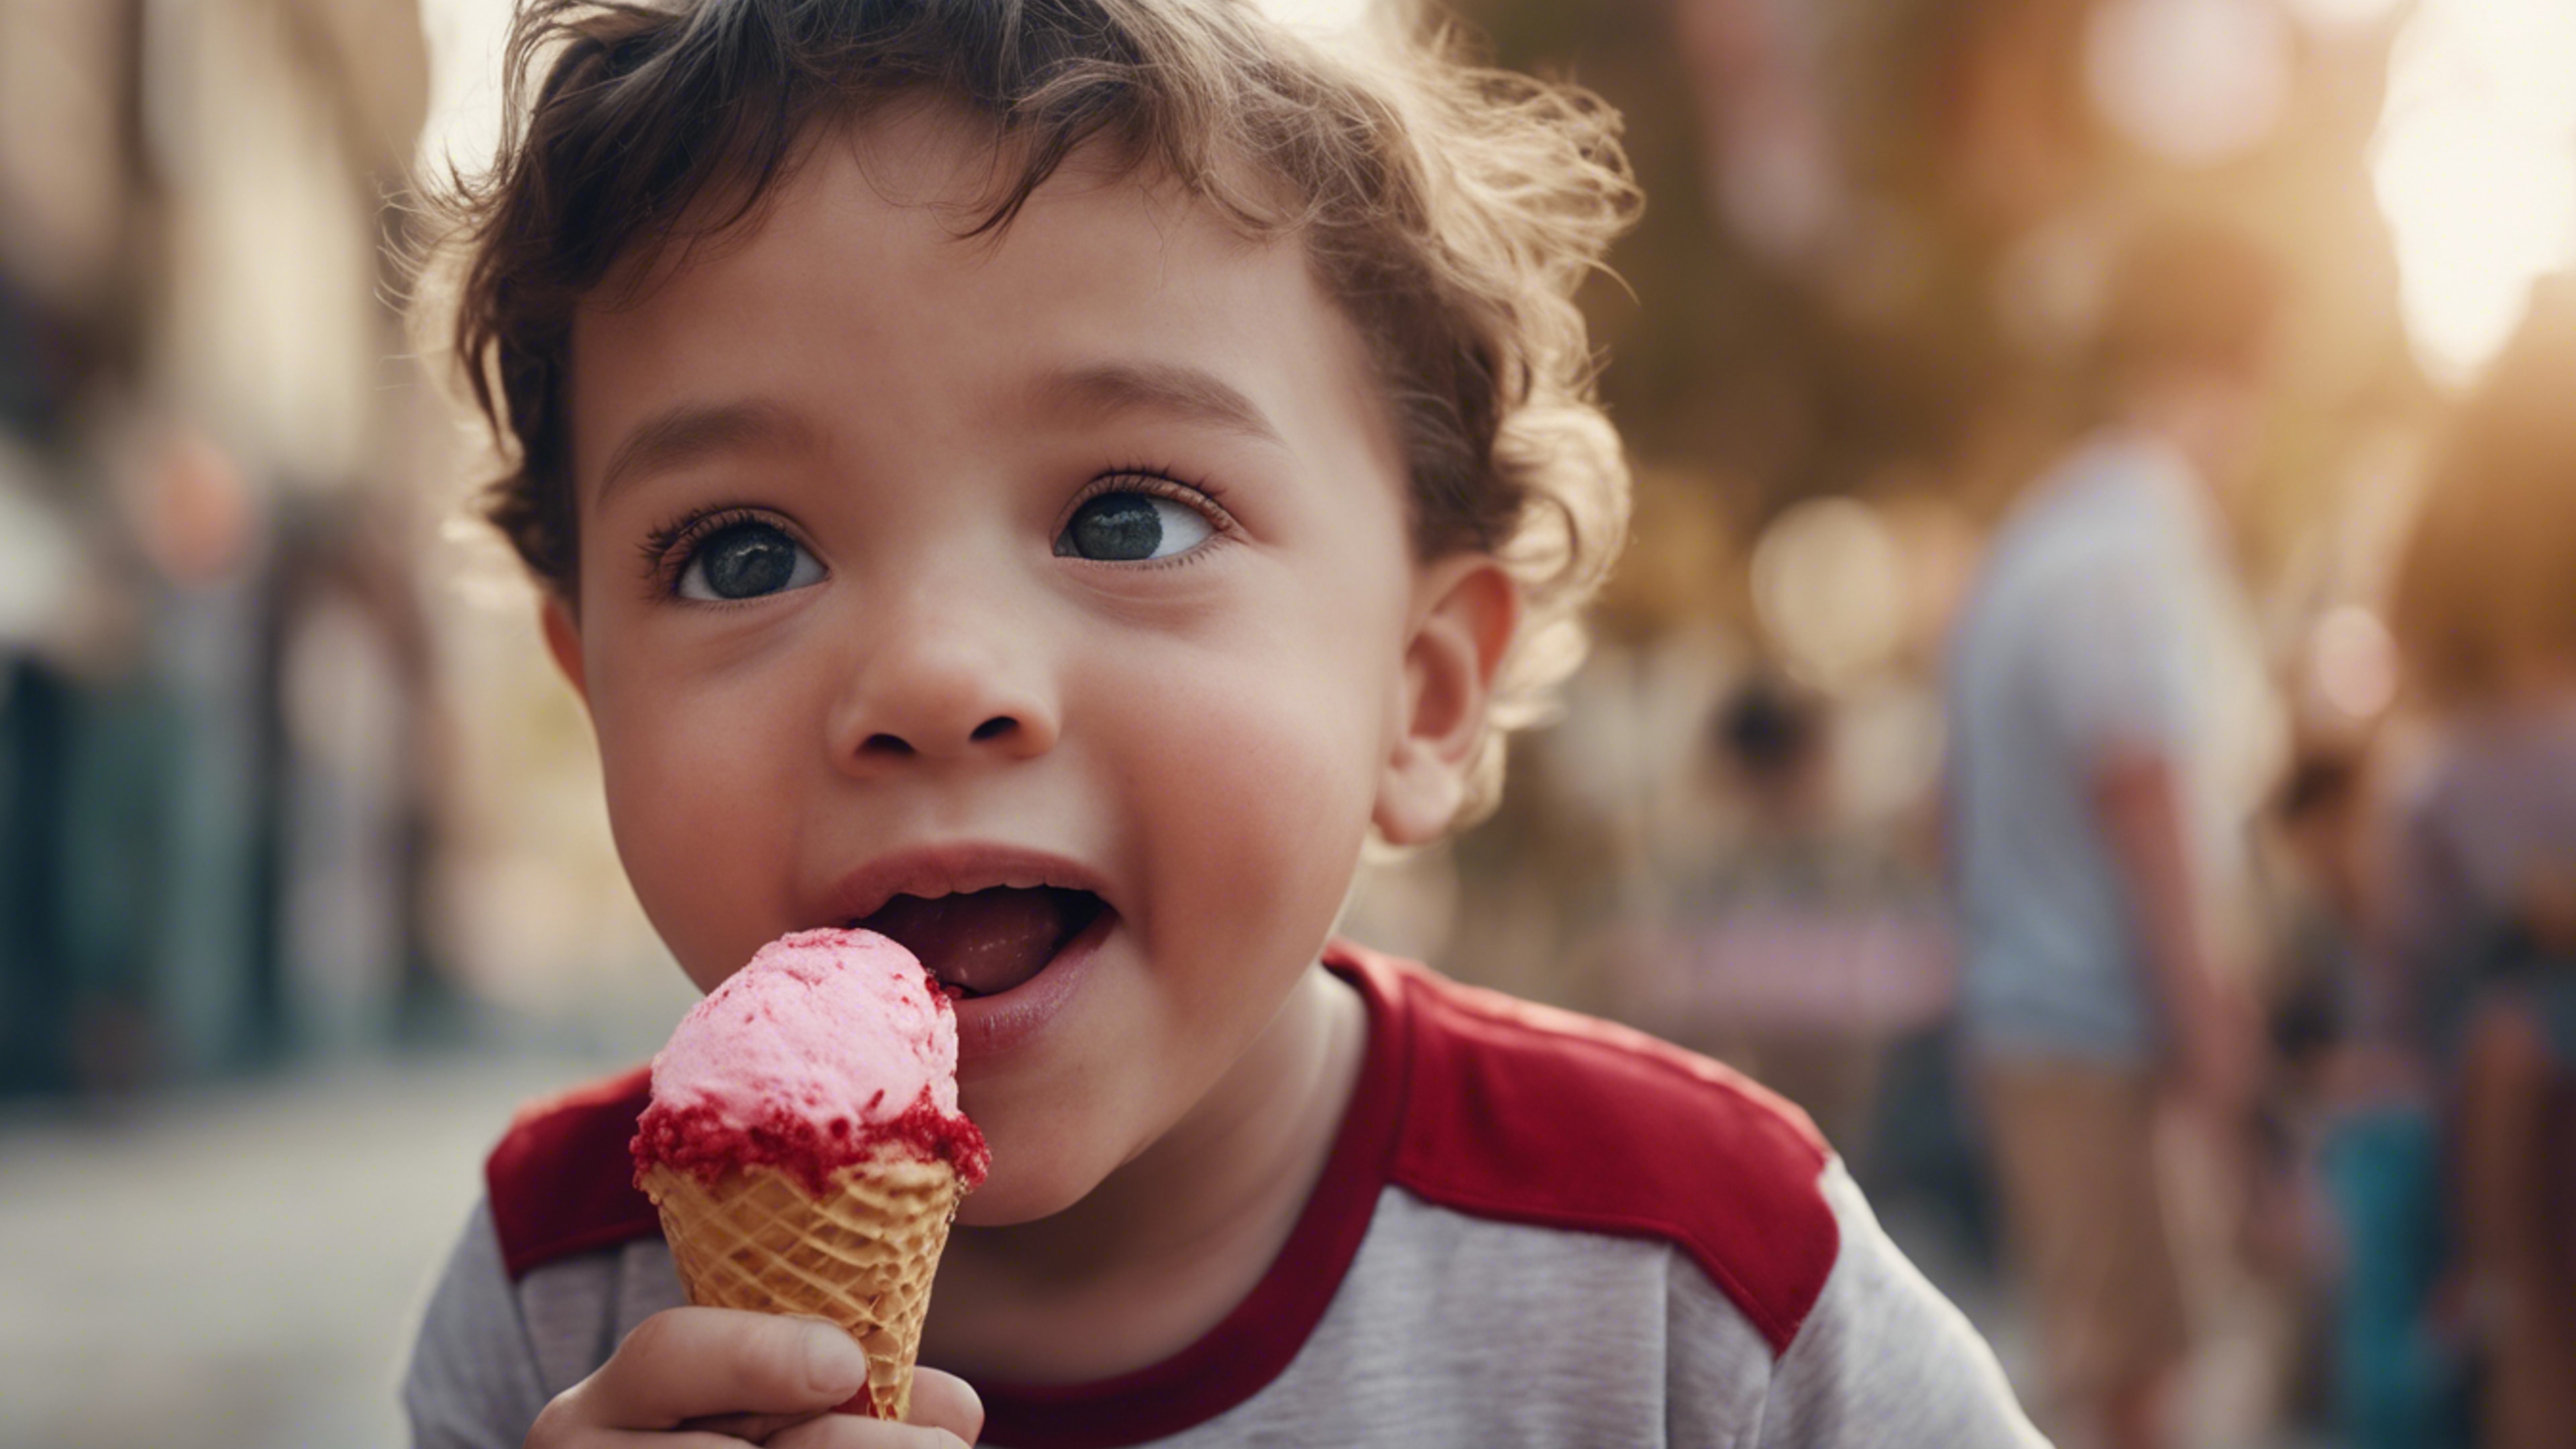 A small child delighting in a red velvet ice cream cone, with a wide-eyed expression of joy on his face. 牆紙[7a3fbd1e60614c42931f]